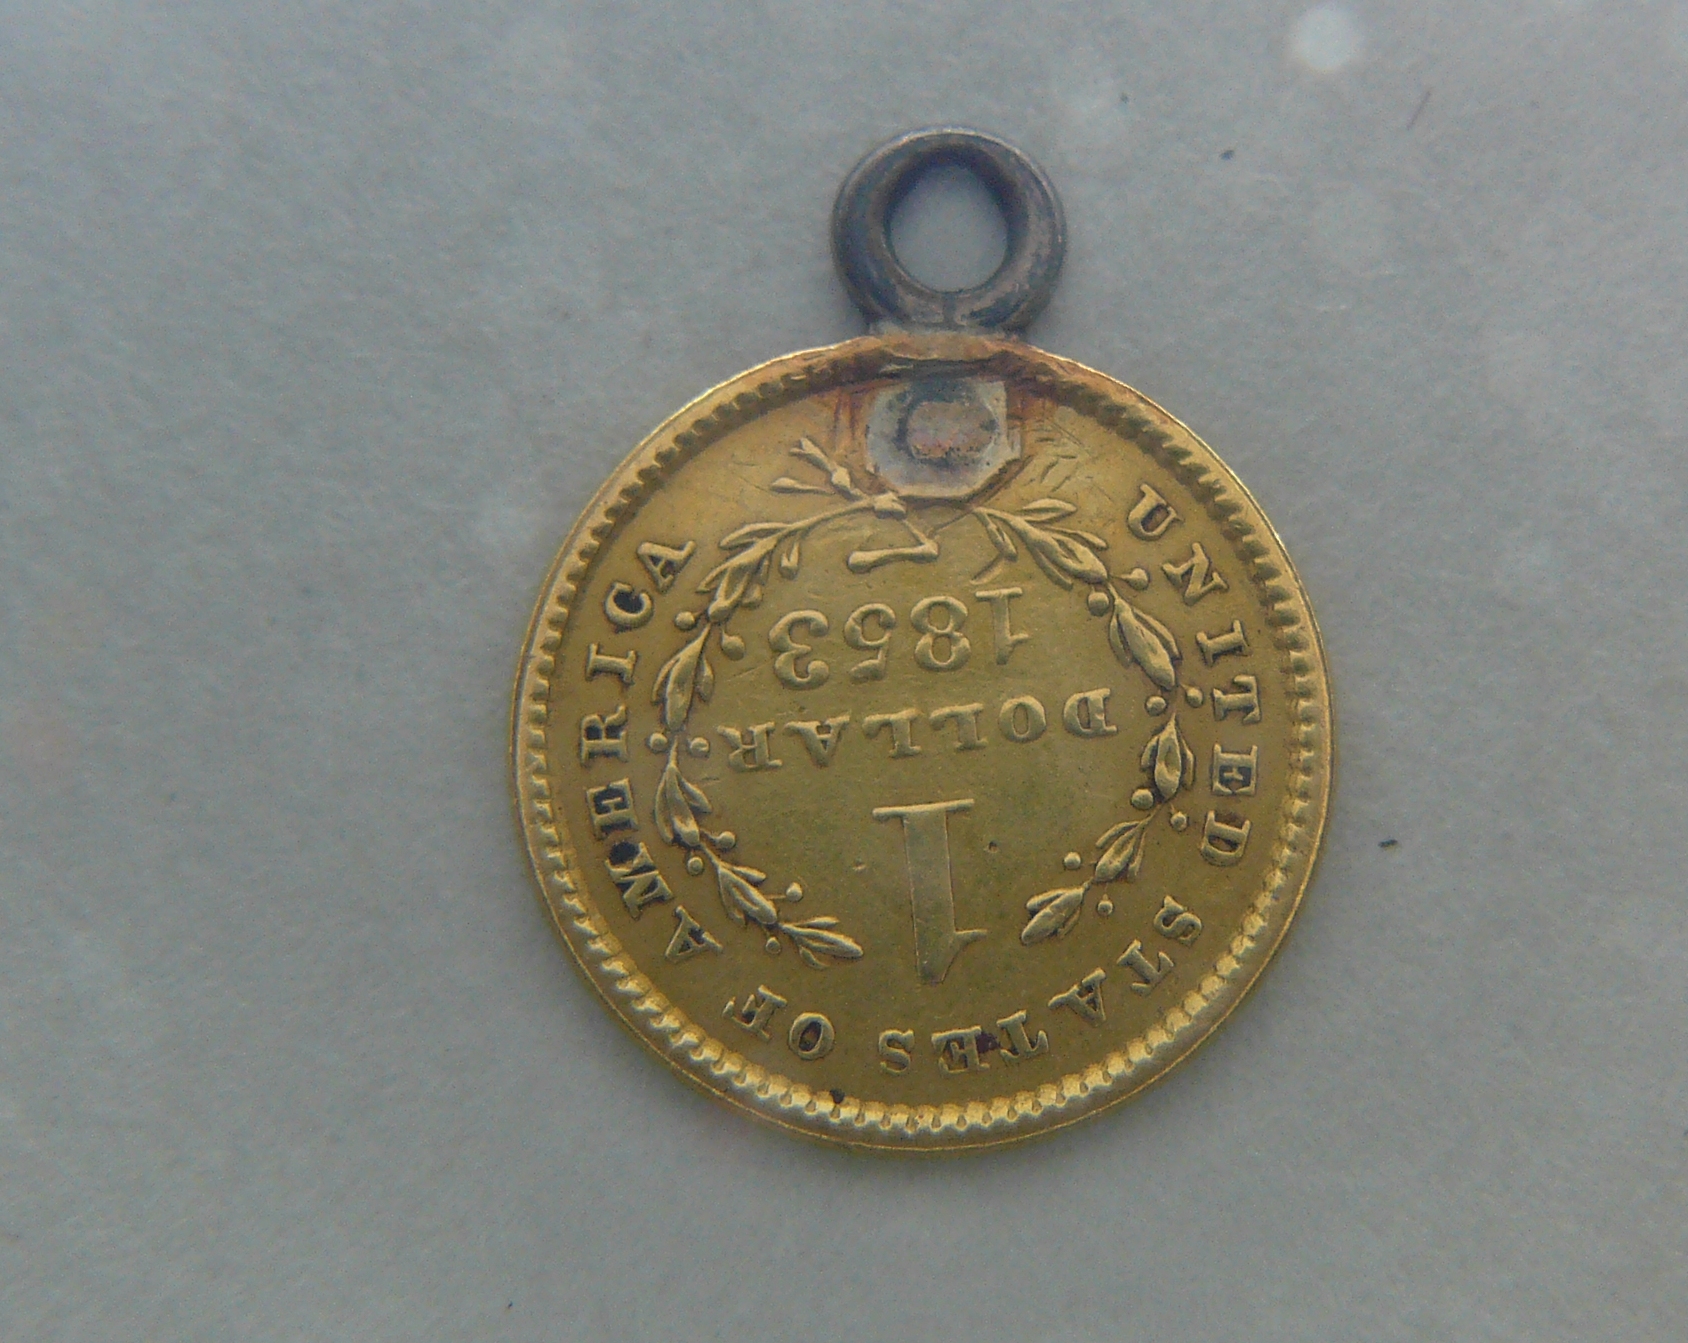 A USA gold $1 coin 1853, with attached suspension ring.